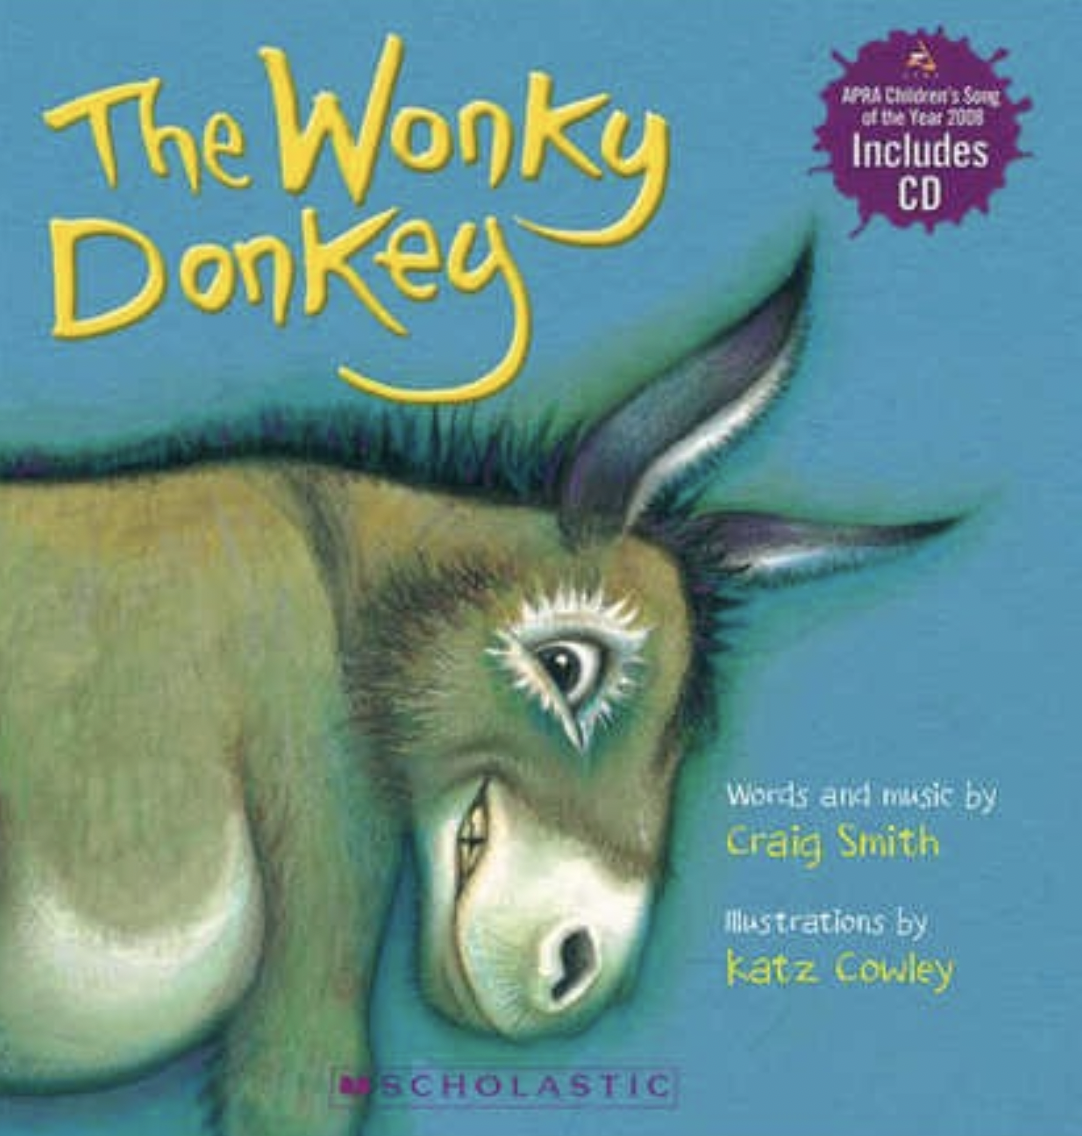 Wonky Donkey Board Book (with CD) by Craig Smith